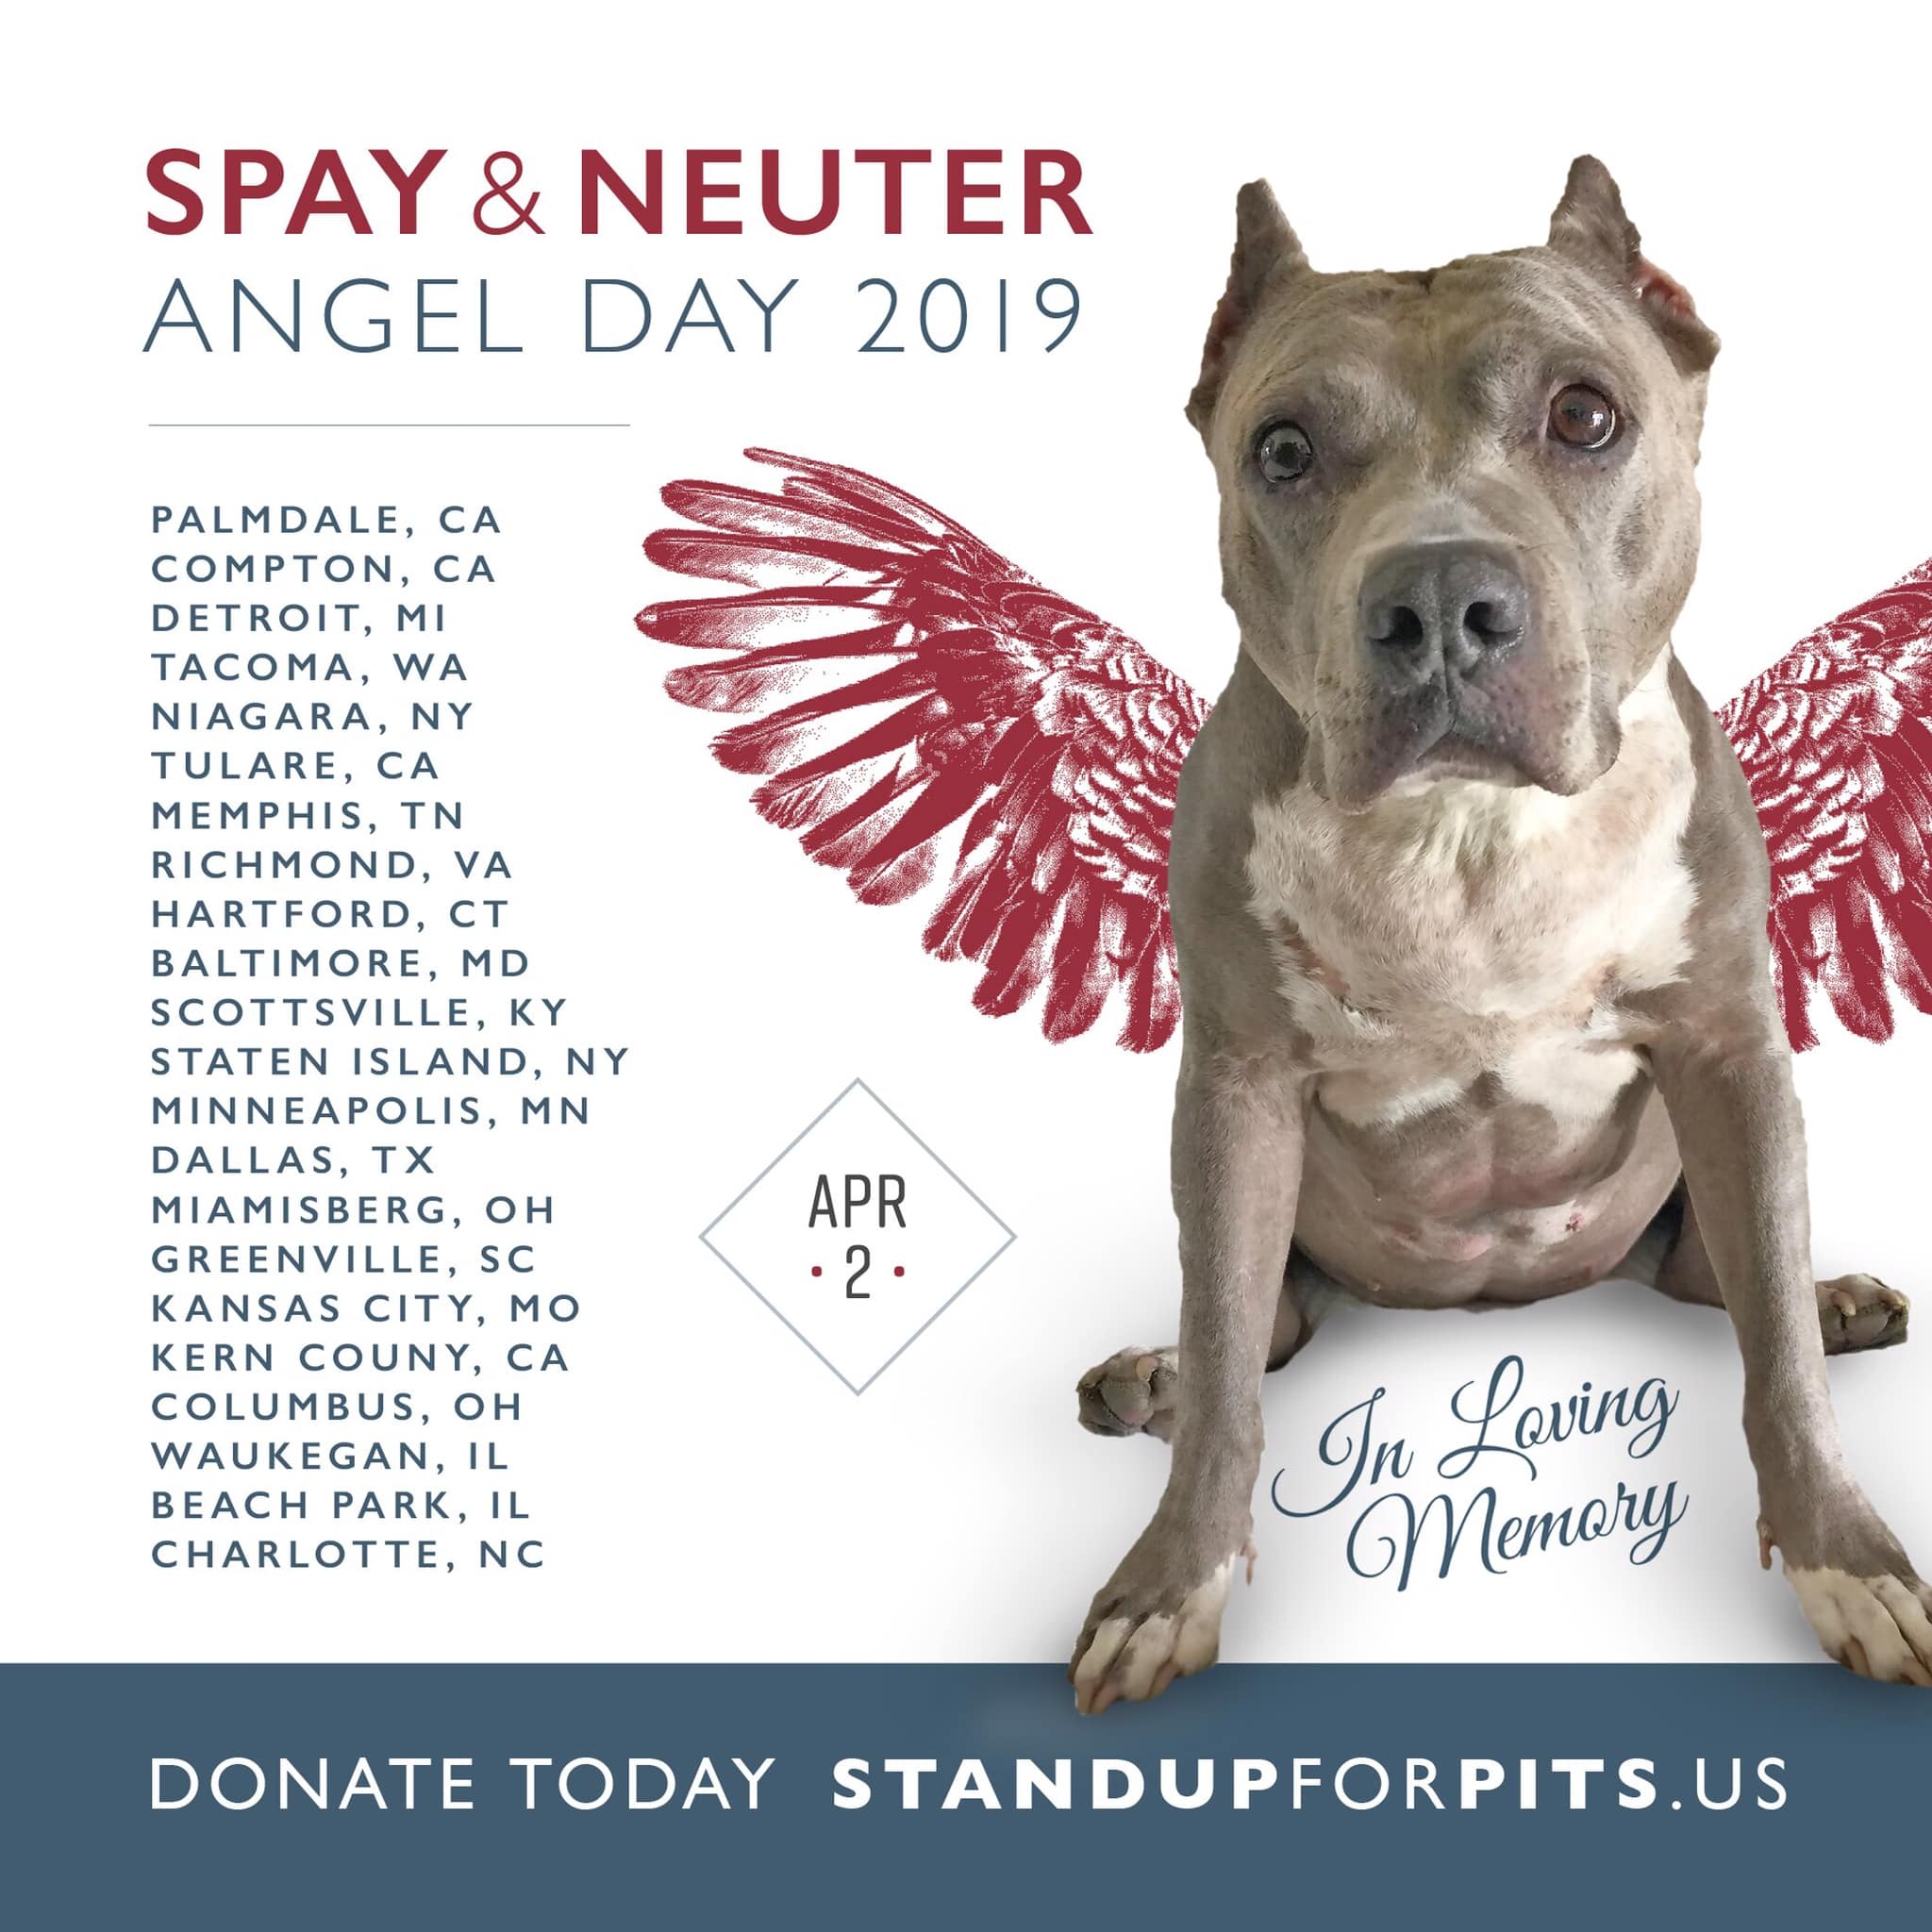 Spay & Neuter ANGEL Day 2019 cities announced!!!!